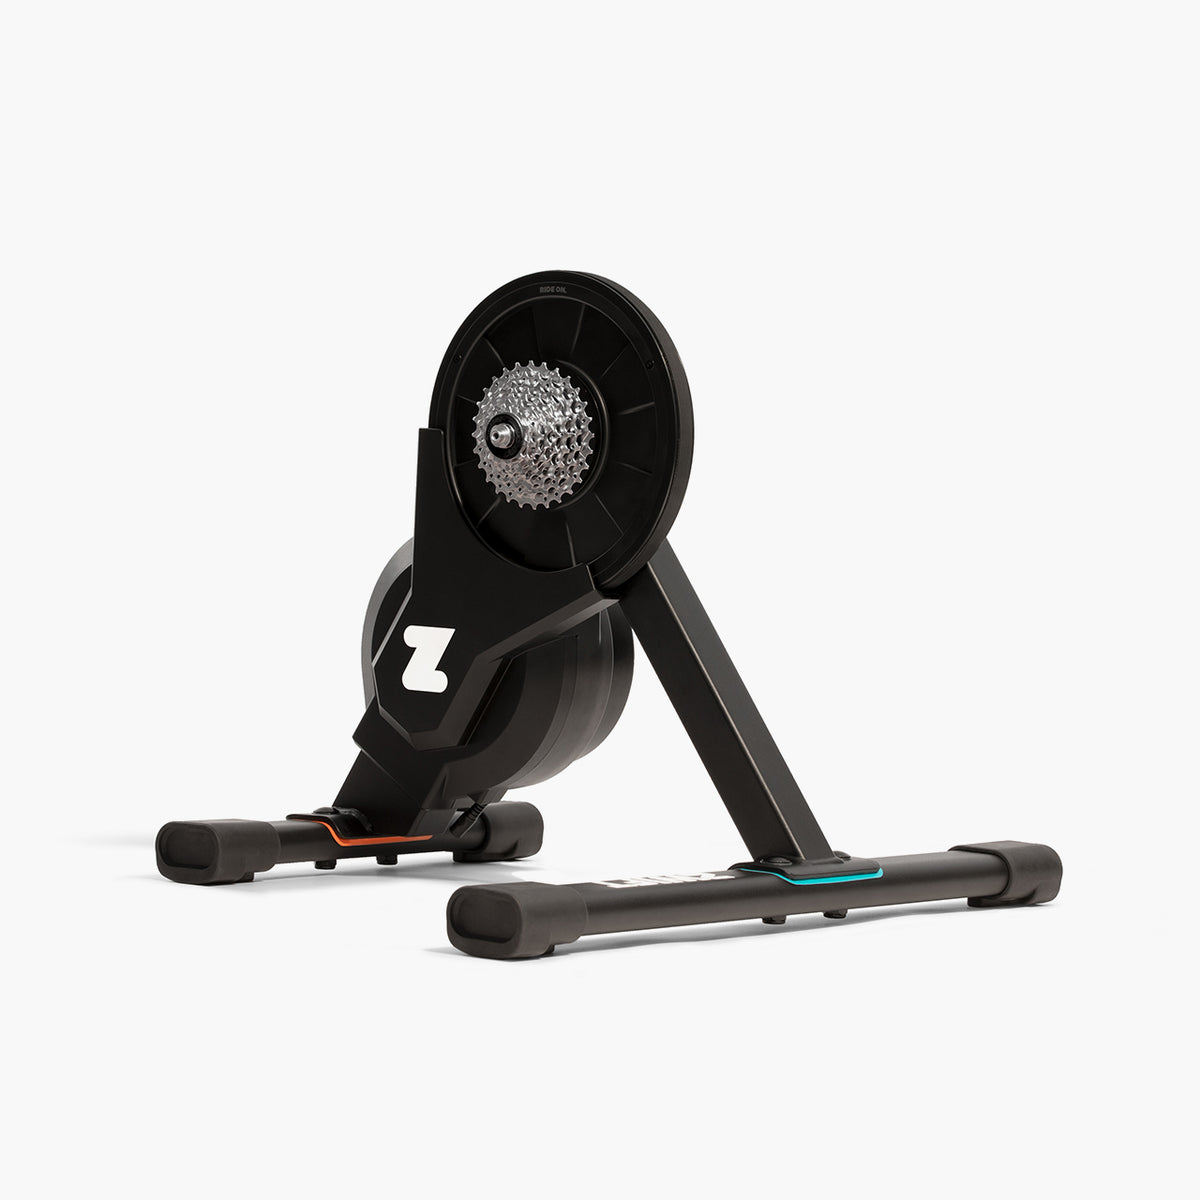 Zwift Hub Smart Turbo Trainer with 8 speed cassette